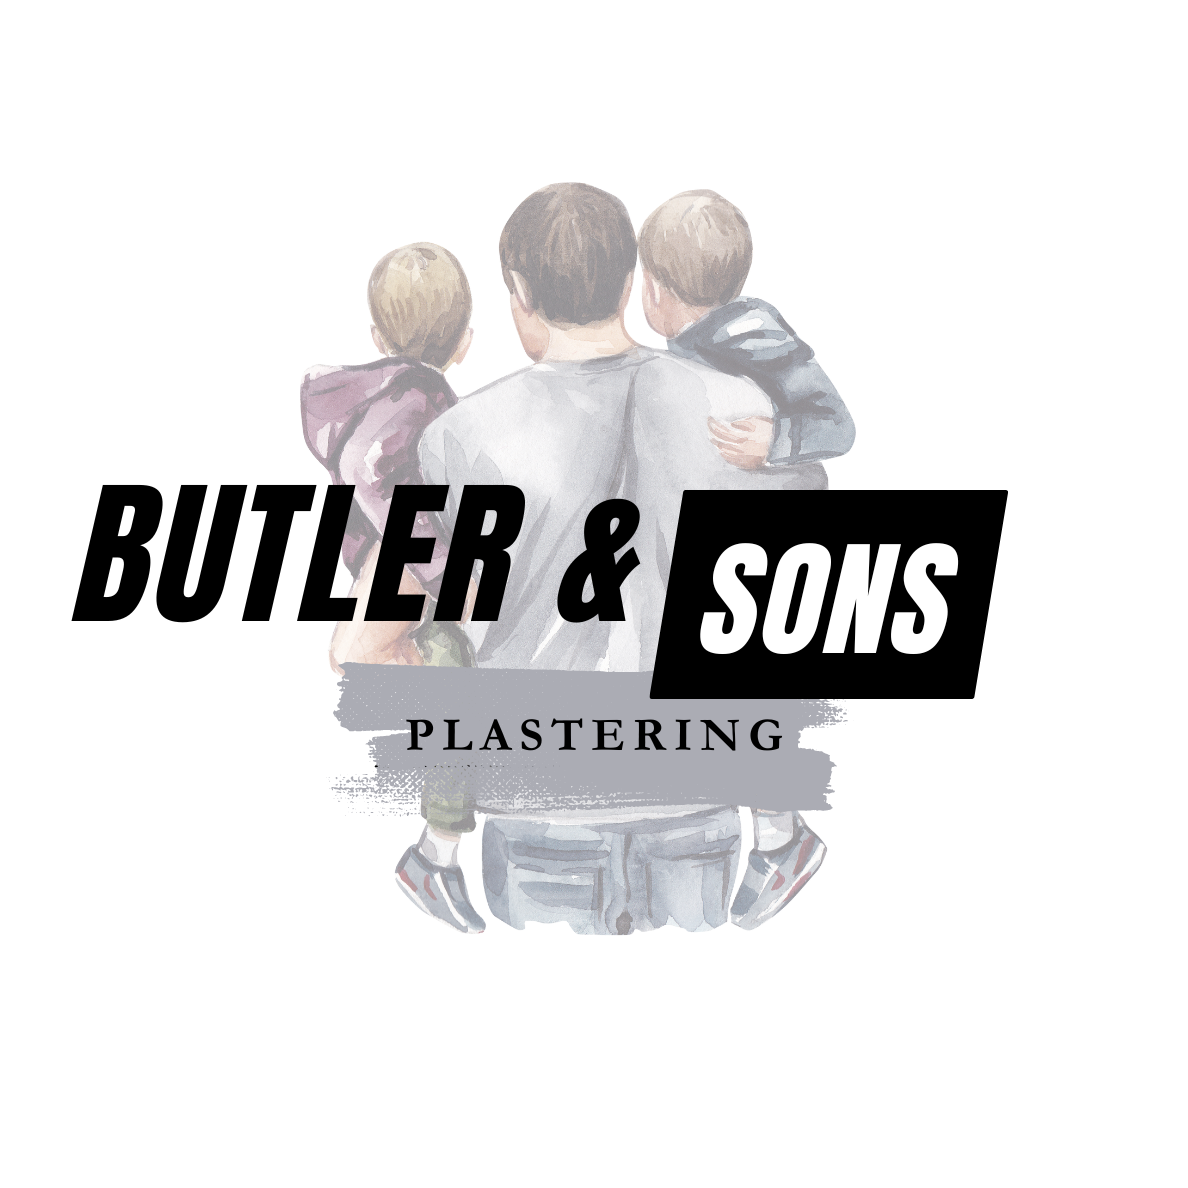 Butler and Sons Plastering